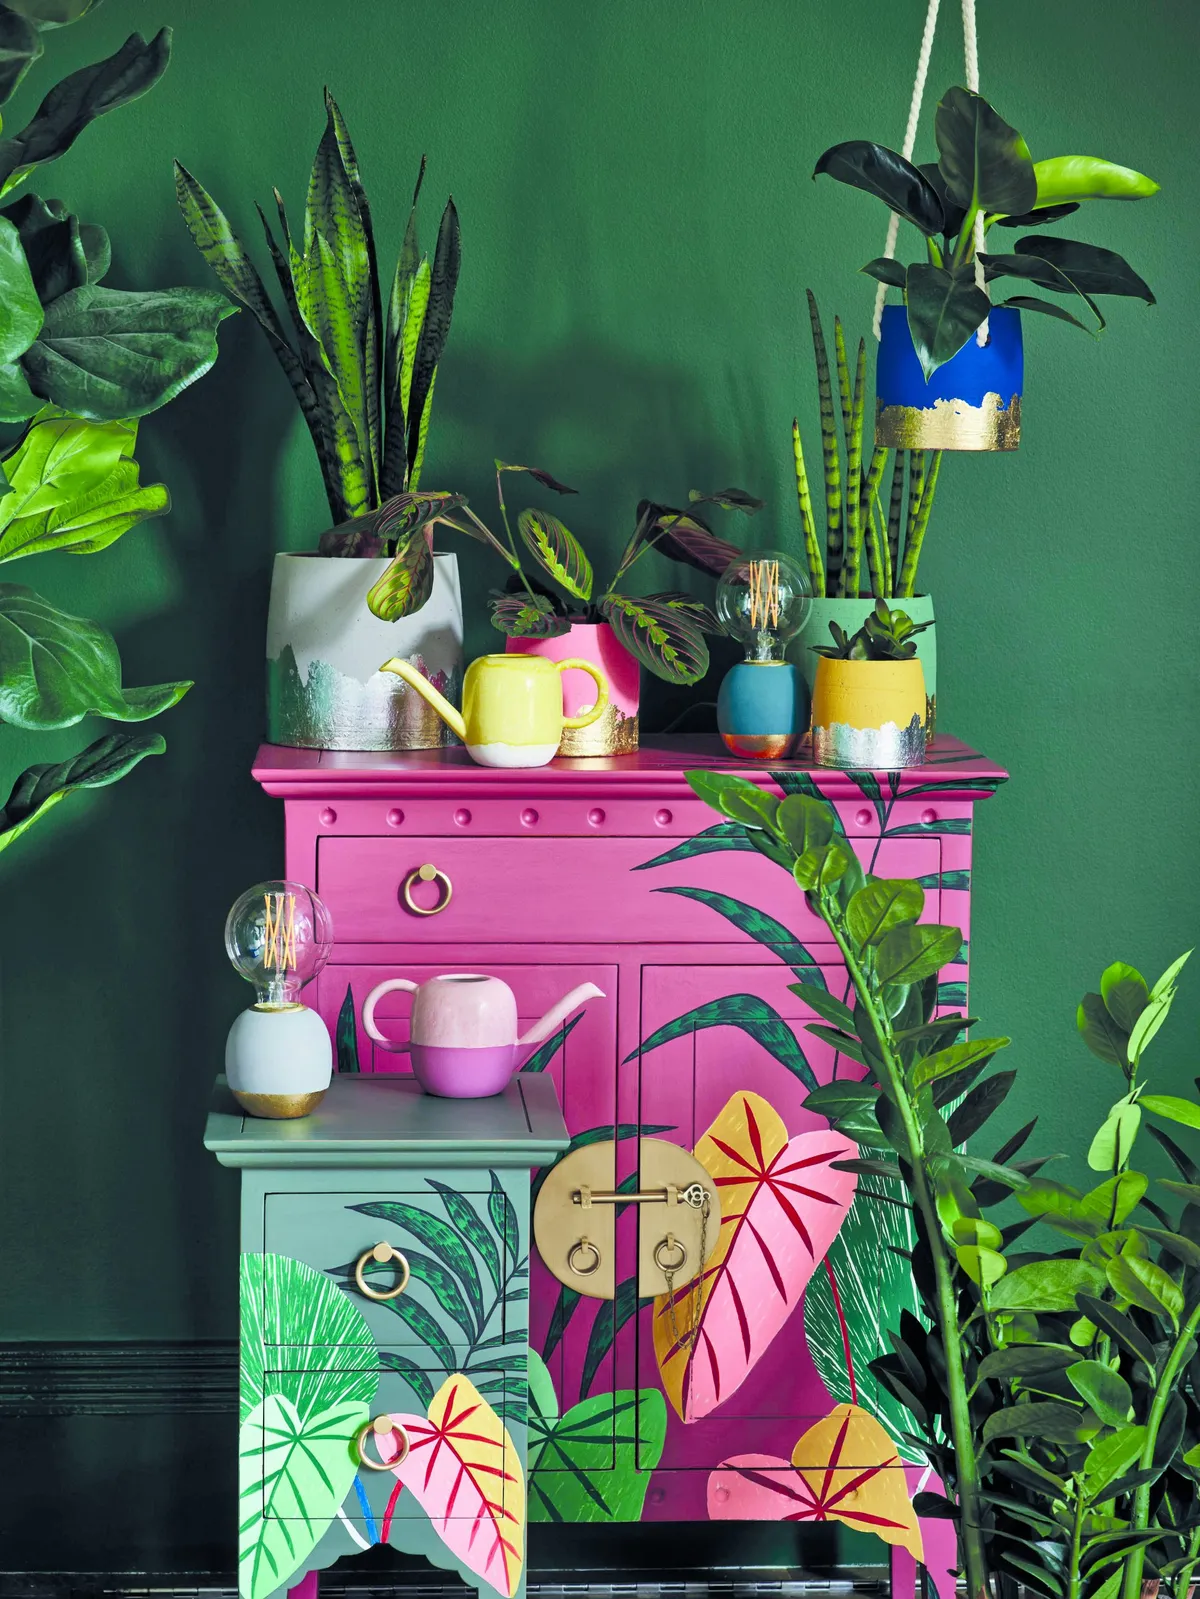 If you don’t have the space for plants, botanical motifs will boost the jungle feel Pink Iro cabinet, £565; green Iro bedside table, £198; Tierra foiled base plant pot, collection from £8.50; mini ceramic watering cans, £19.50 each, all Oliver Bonas